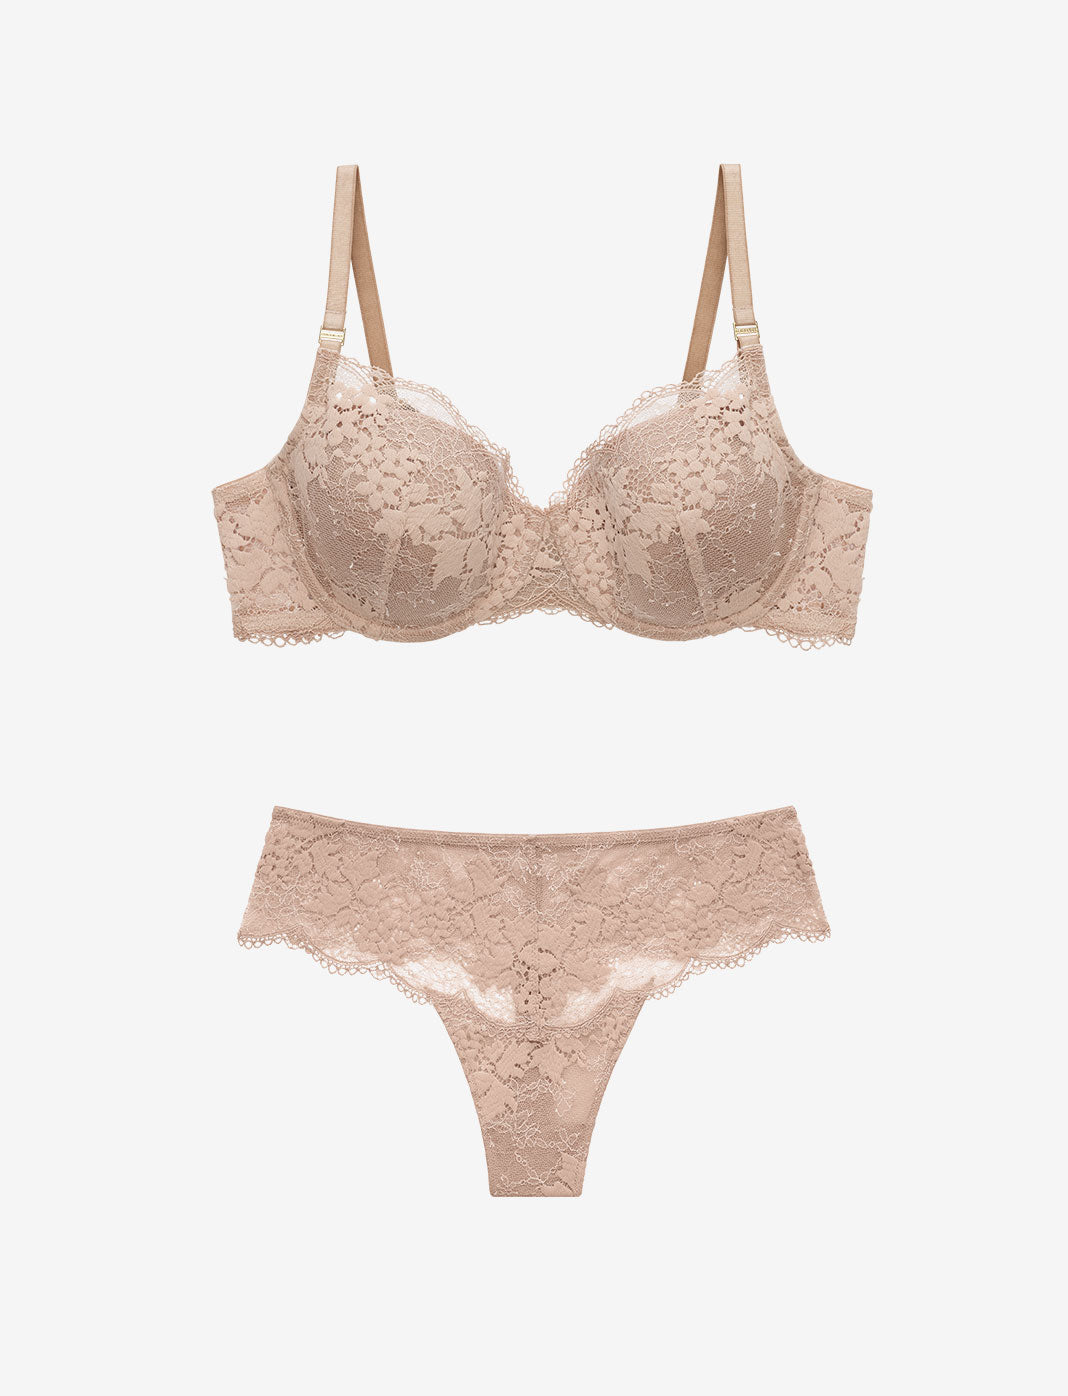 http://www.thirdlove.com/cdn/shop/files/All-Day-Lace-T-Shirt-Bra-_-All-Day-Lace-Thong--taupe.jpg?v=1705622057